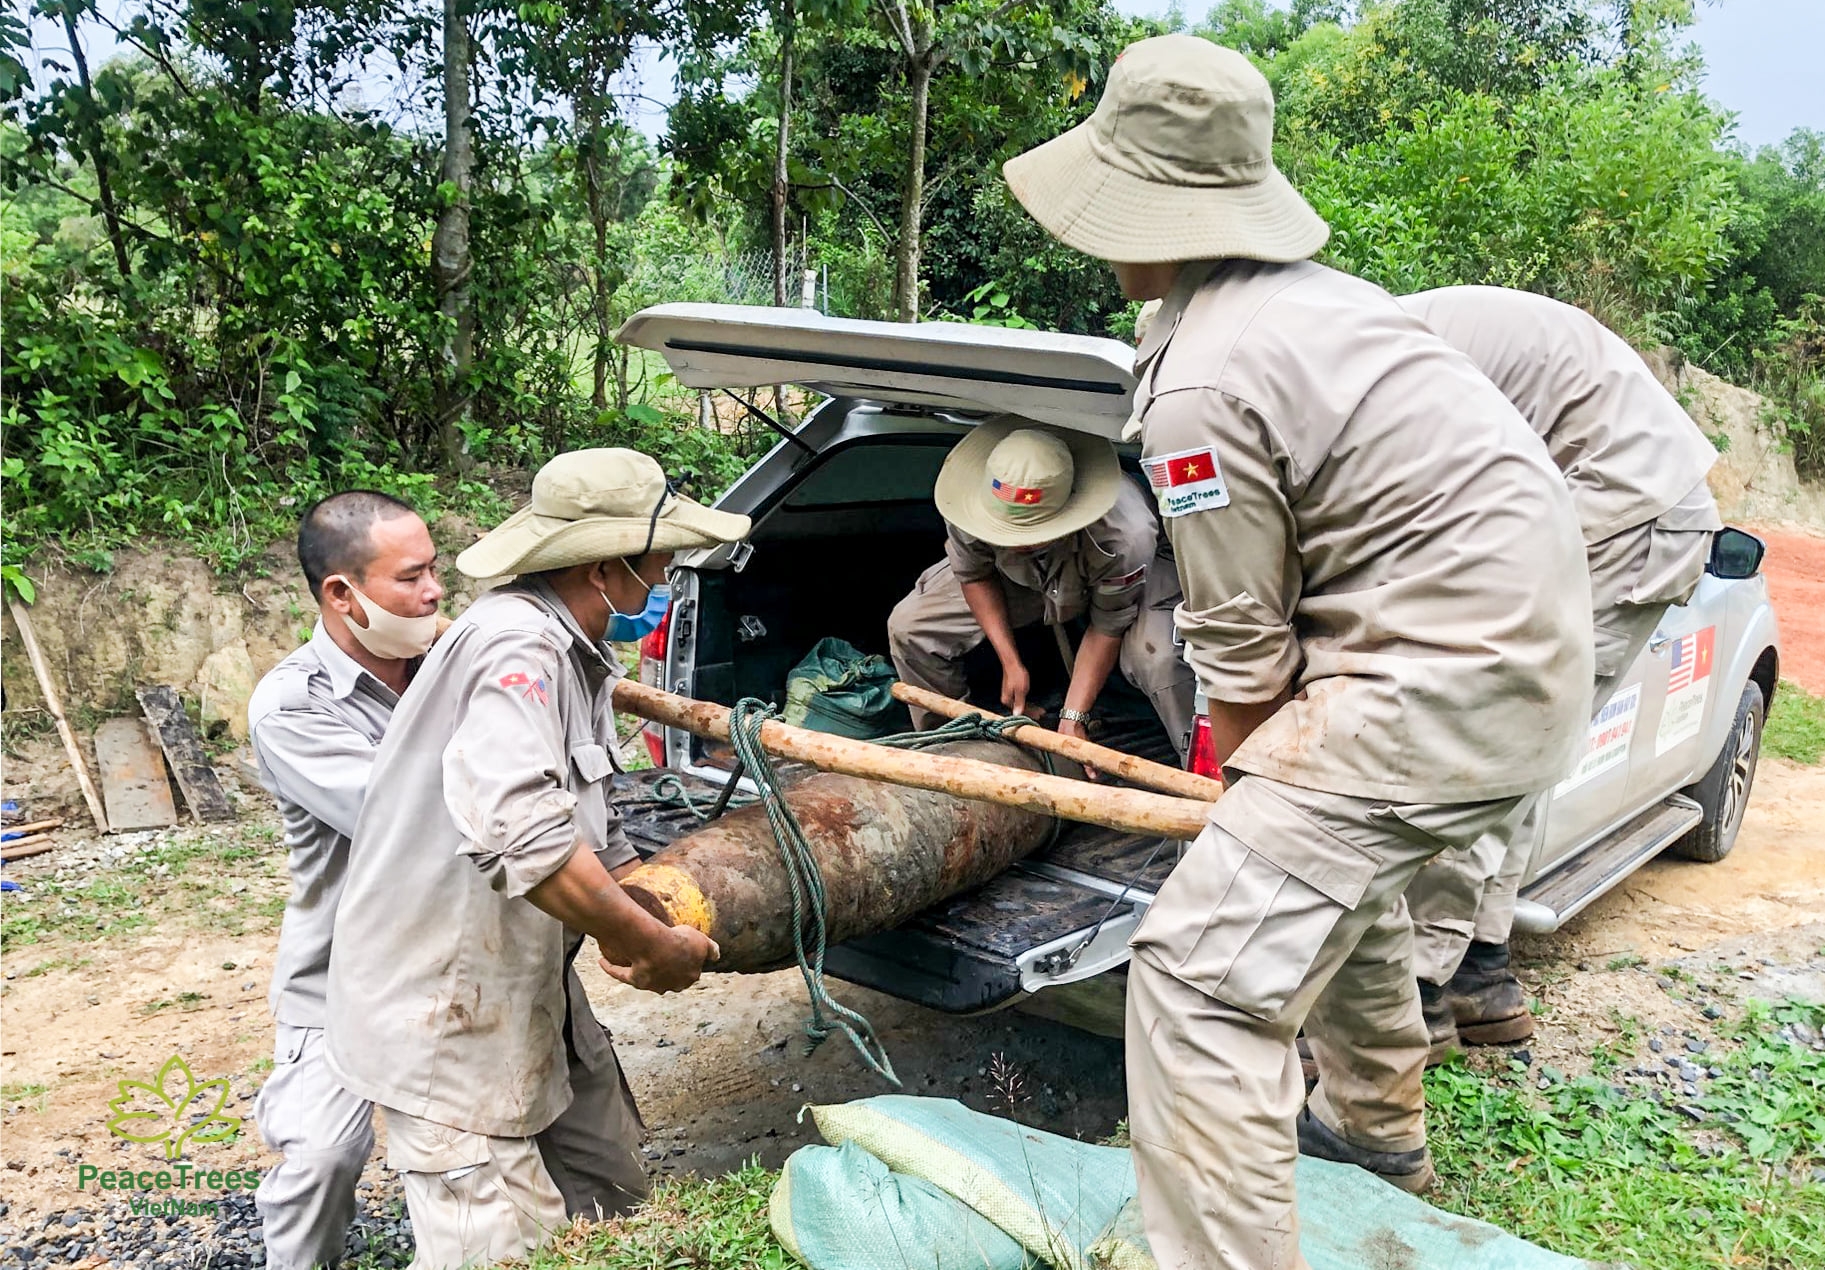 PeaceTrees continues UXO clearing efforts in Quang Tri